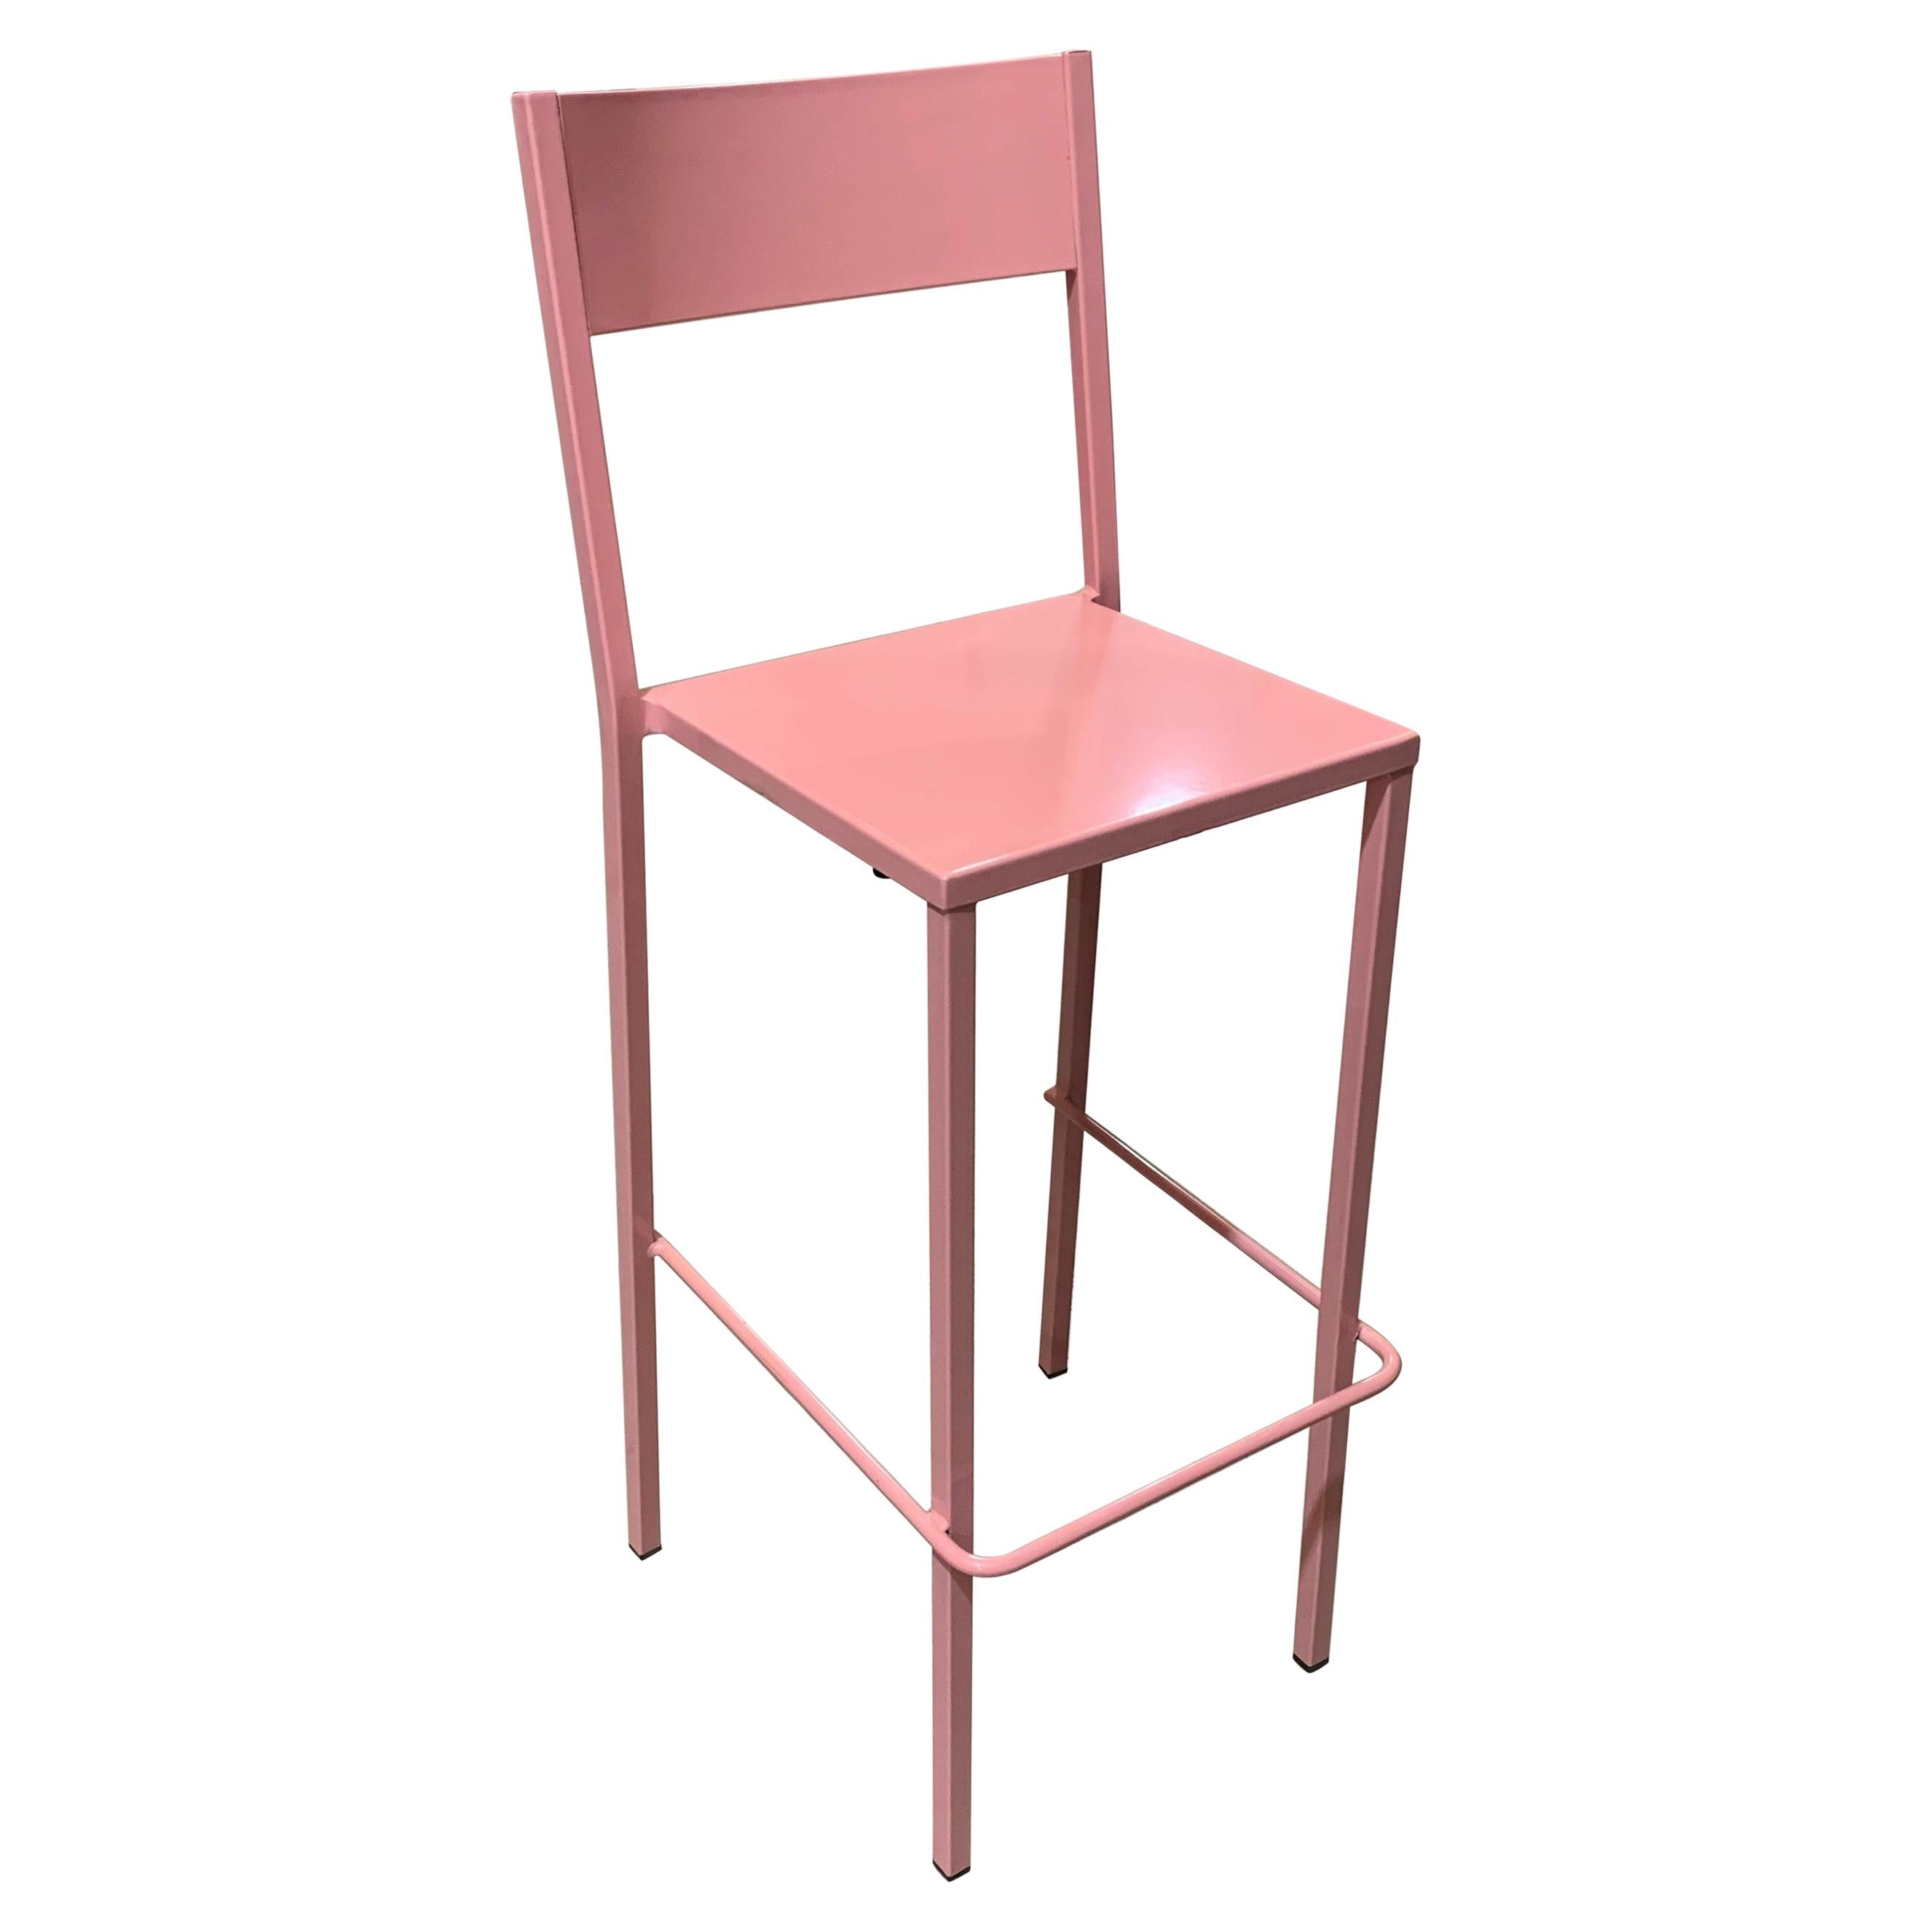 New Pink Industrial Wrought Iron Shop, Counter Stool with Metal Seat and Back